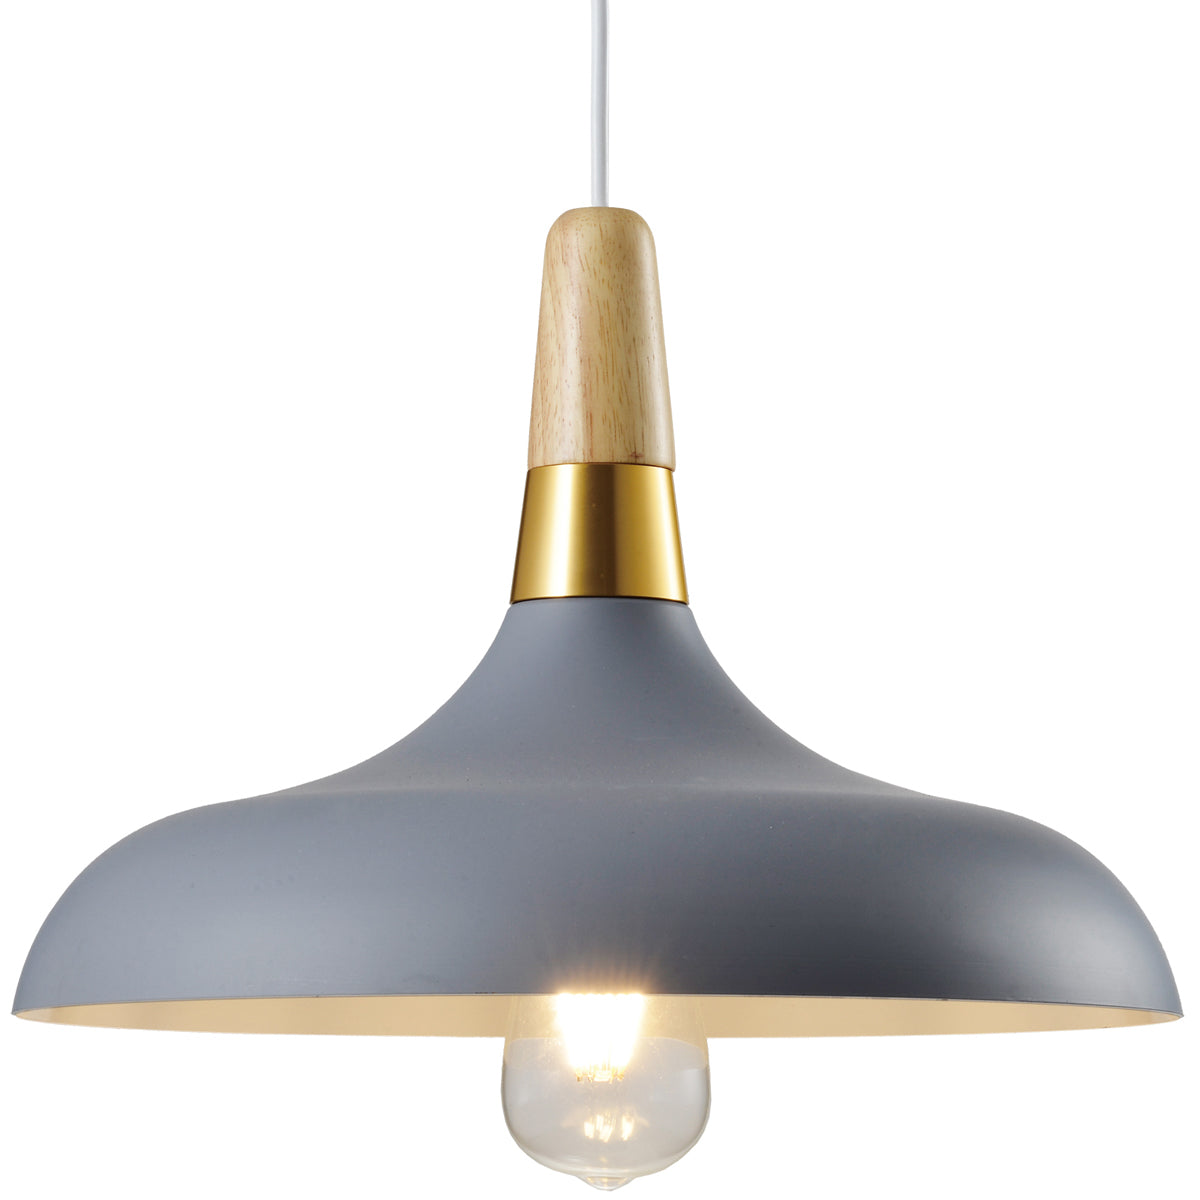 The Esther Pendant is a stylish modern metal ceiling light finished in matt grey with a white inner.  Complete with a gold and wooden cap detail attached to a white adjustable cable and matching matt ceiling rose.